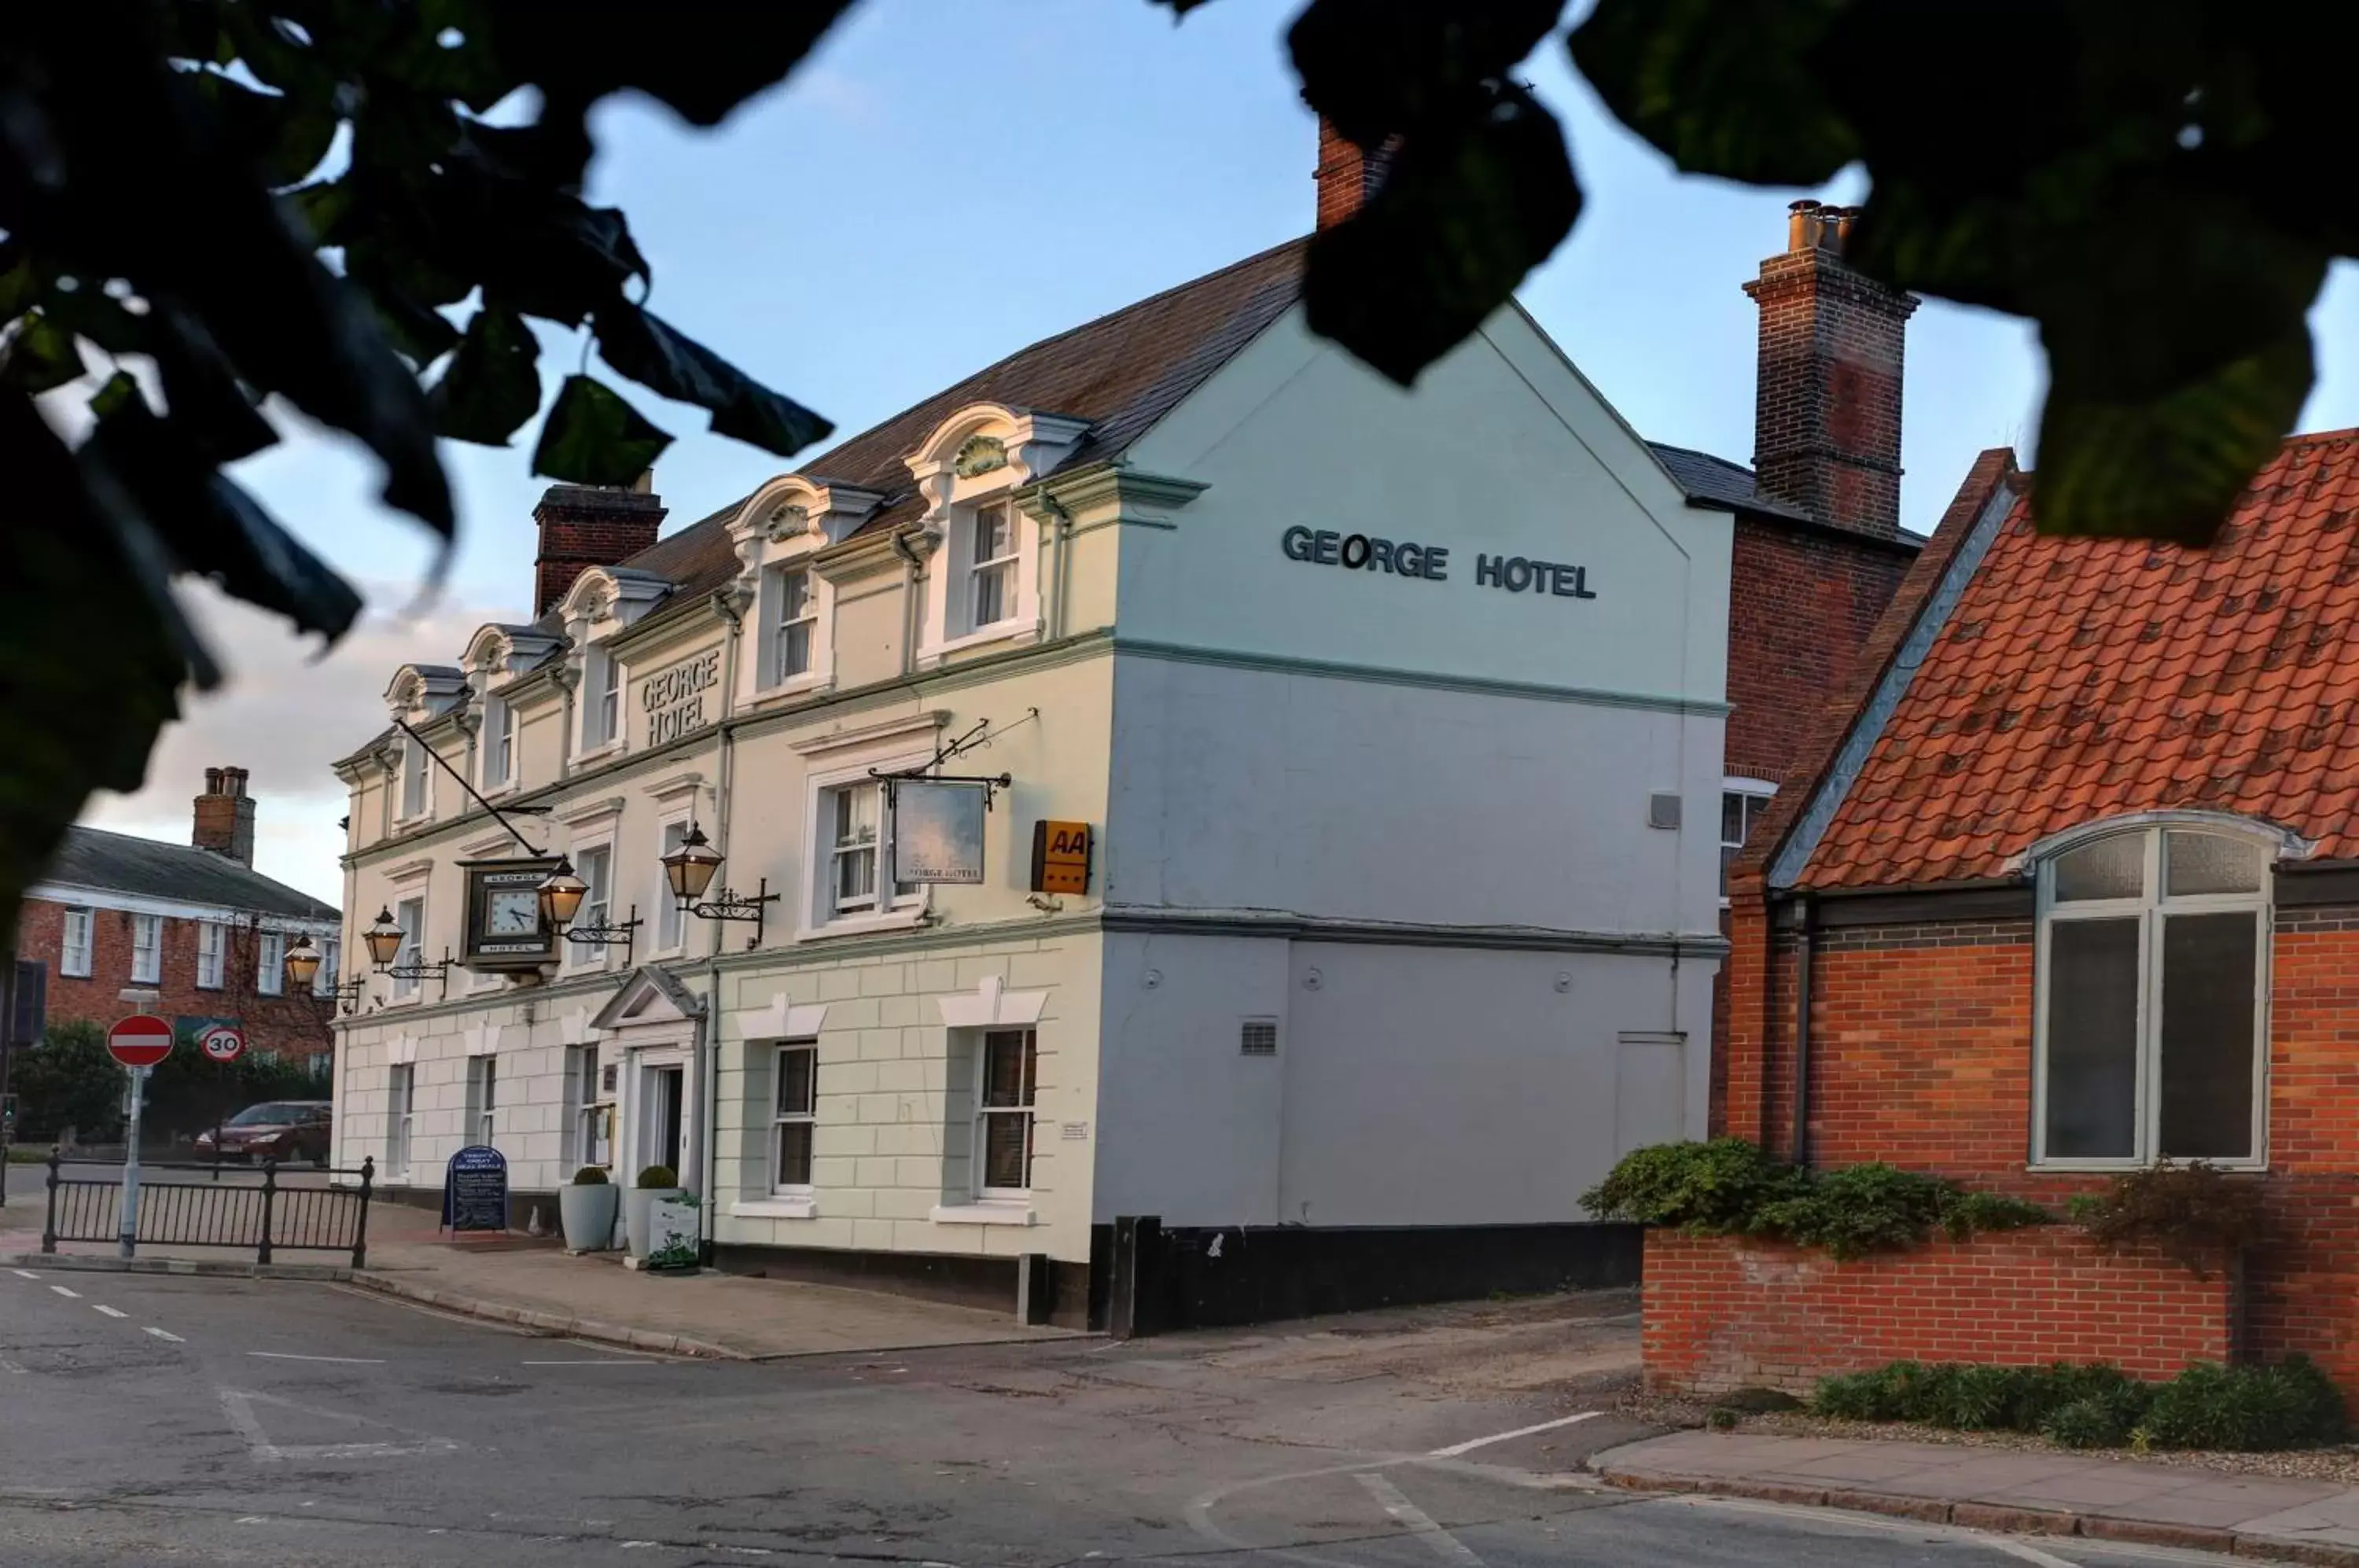 Property building in Best Western The George Hotel, Swaffham